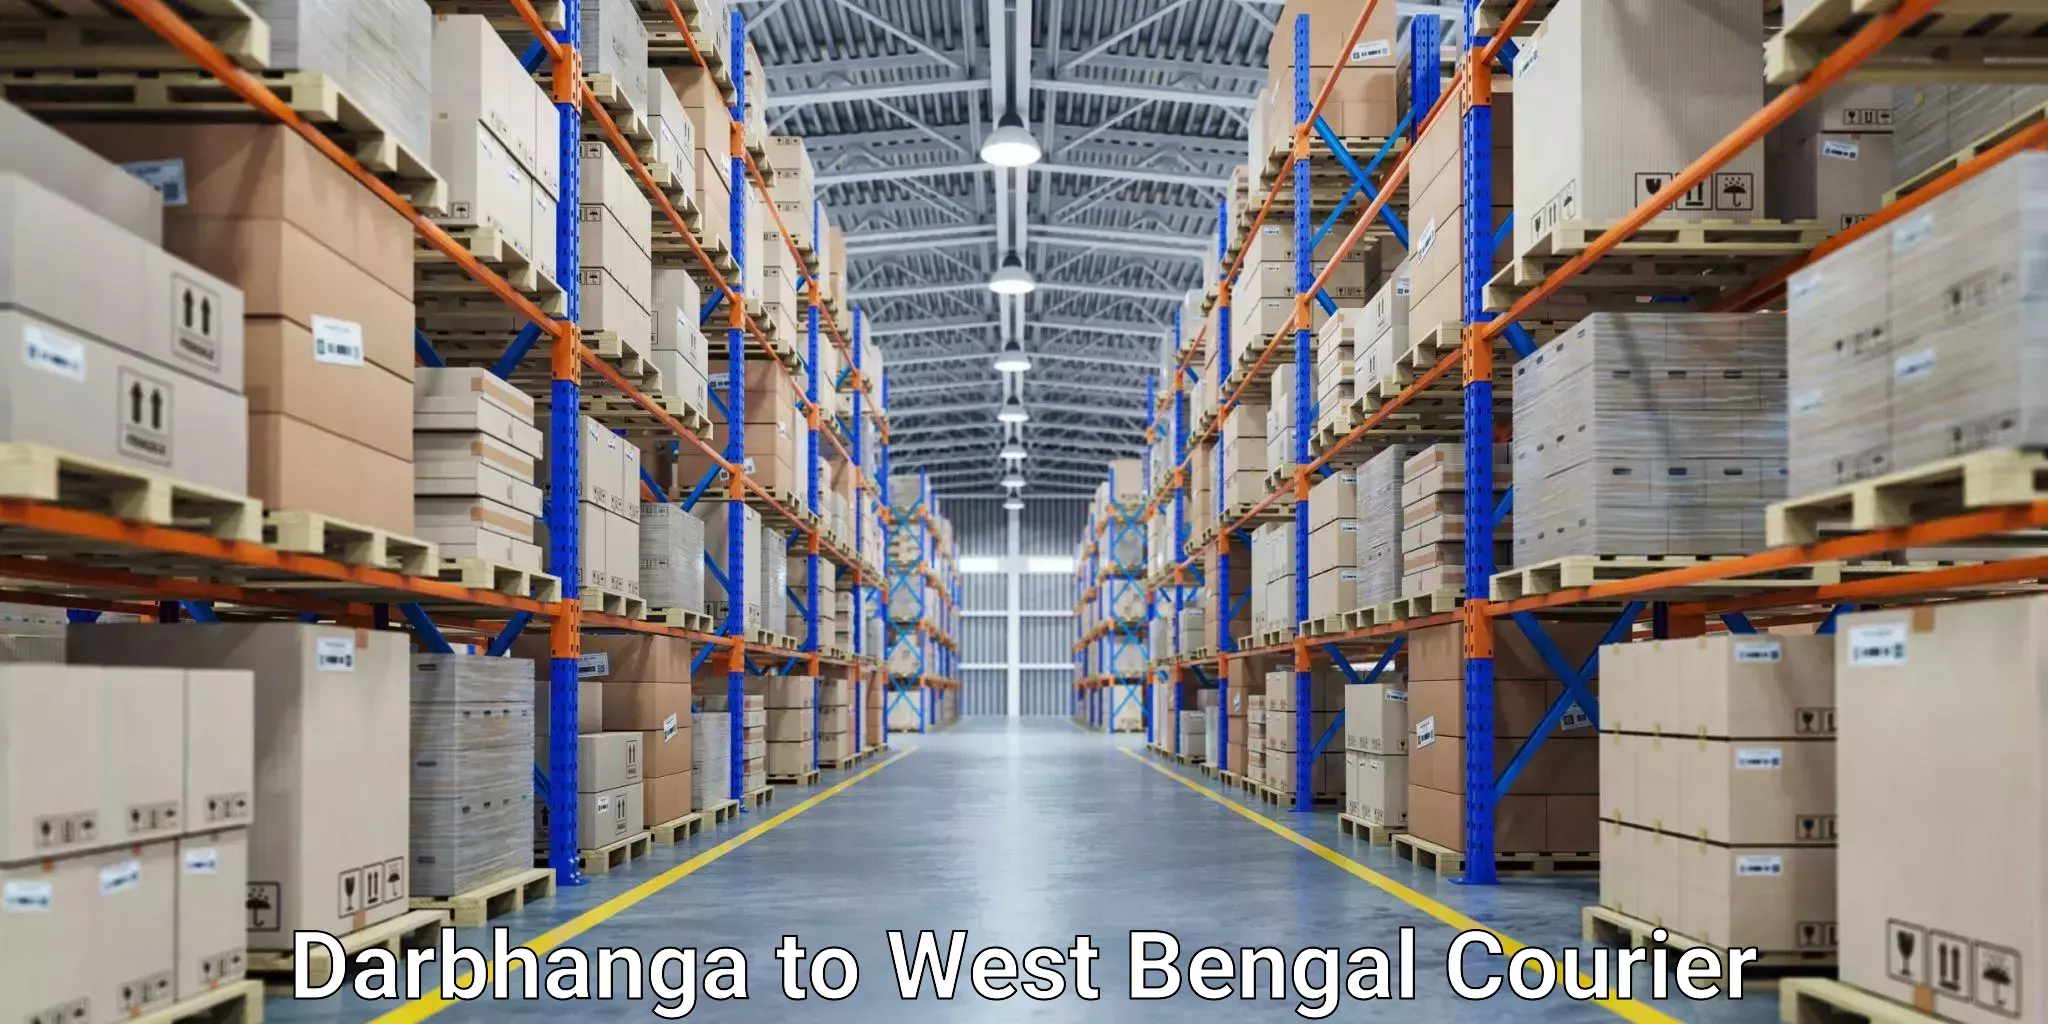 Package delivery network Darbhanga to West Bengal